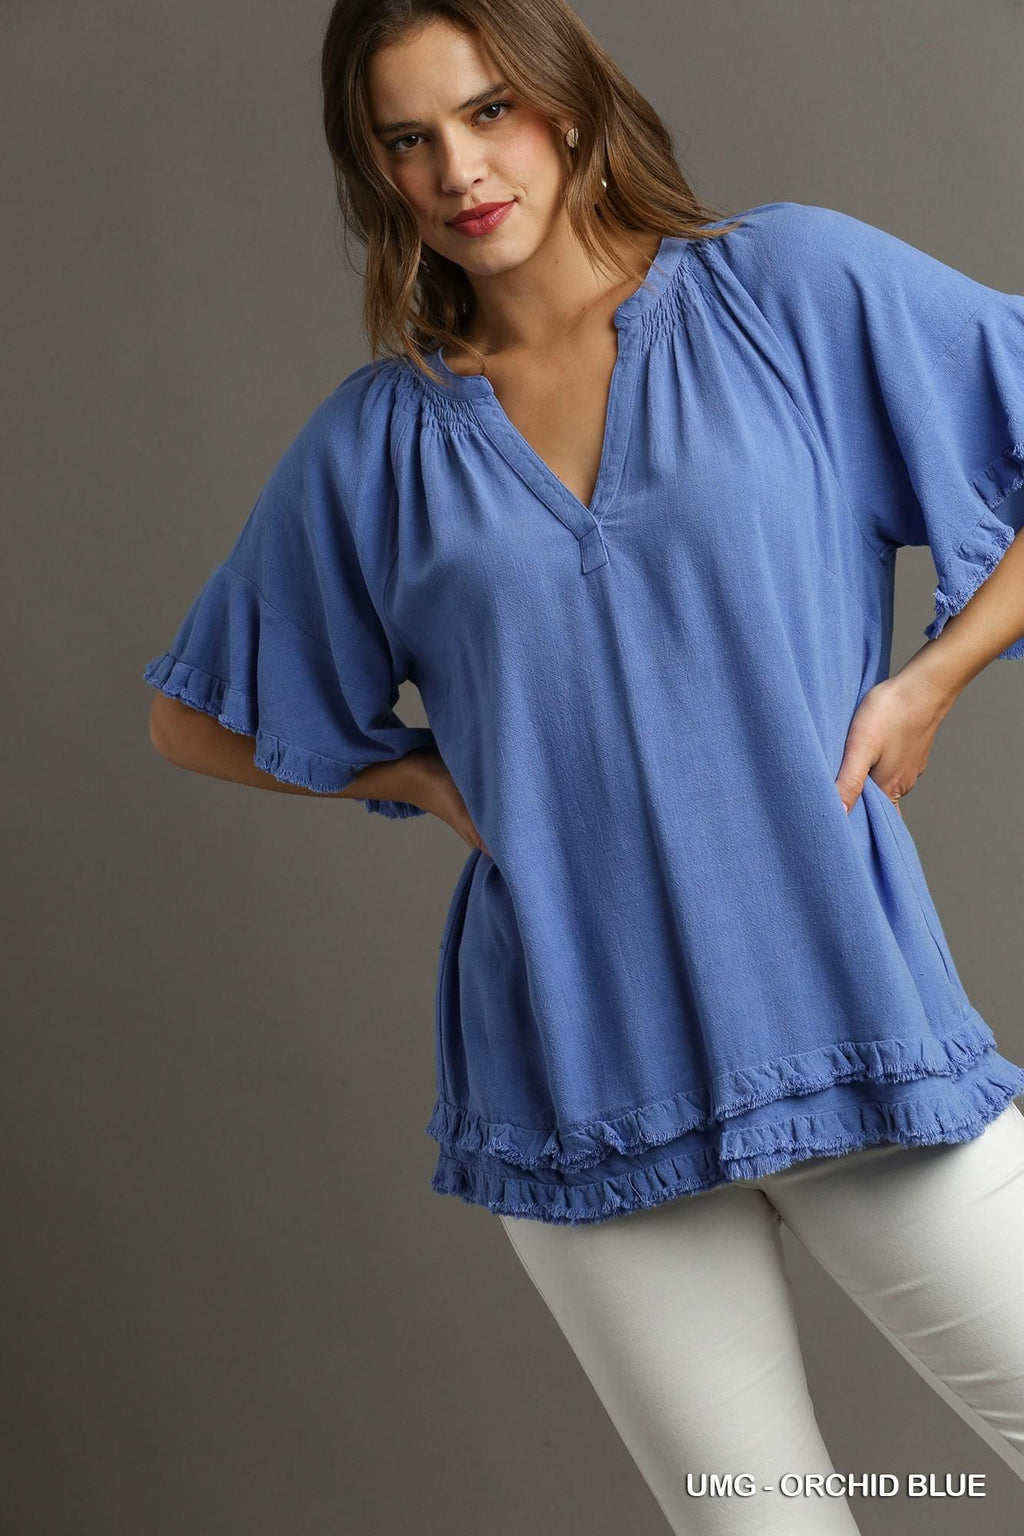 Orchid Blue Linen Boxy Cut Top by Umgee